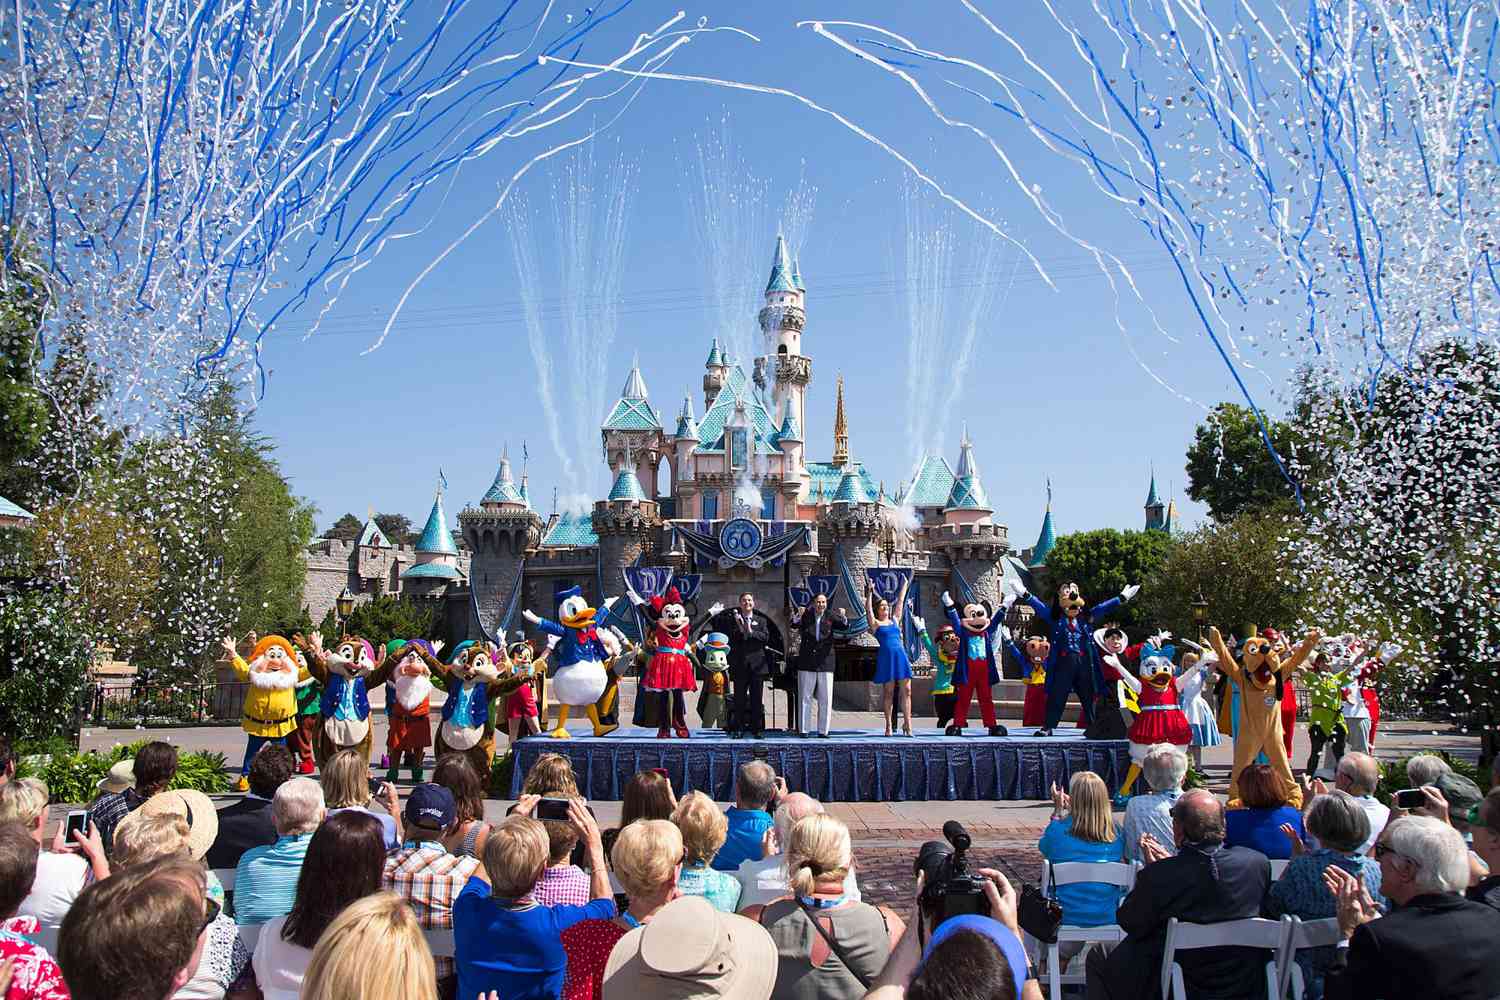 ANAHEIM, CA - JULY 17: In this handout photo provided by Disney parks, Mickey Mouse and his friends celebrate the 60th anniversary of Disneyland park during a ceremony at Sleeping Beauty Castle featuring Academy Award-winning composer, Richard Sherman and Broadway actress and singer Ashley Brown July 17, 2015 in Anaheim, California. Celebrating six decades of magic, the Disneyland Resort Diamond Celebration features three new nighttime spectaculars that immerse guests in the worlds of Disney stories like never before with "Paint the Night," the first all-LED parade at the resort; "Disneyland Forever," a reinvention of classic fireworks that adds projections to pyrotechnics to transform the park experience; and a moving new version of "World of Color" that celebrates Walt Disneys dream for Disneyland. (Photo by Paul Hiffmeyer/Disneyland Resort via Getty Images)